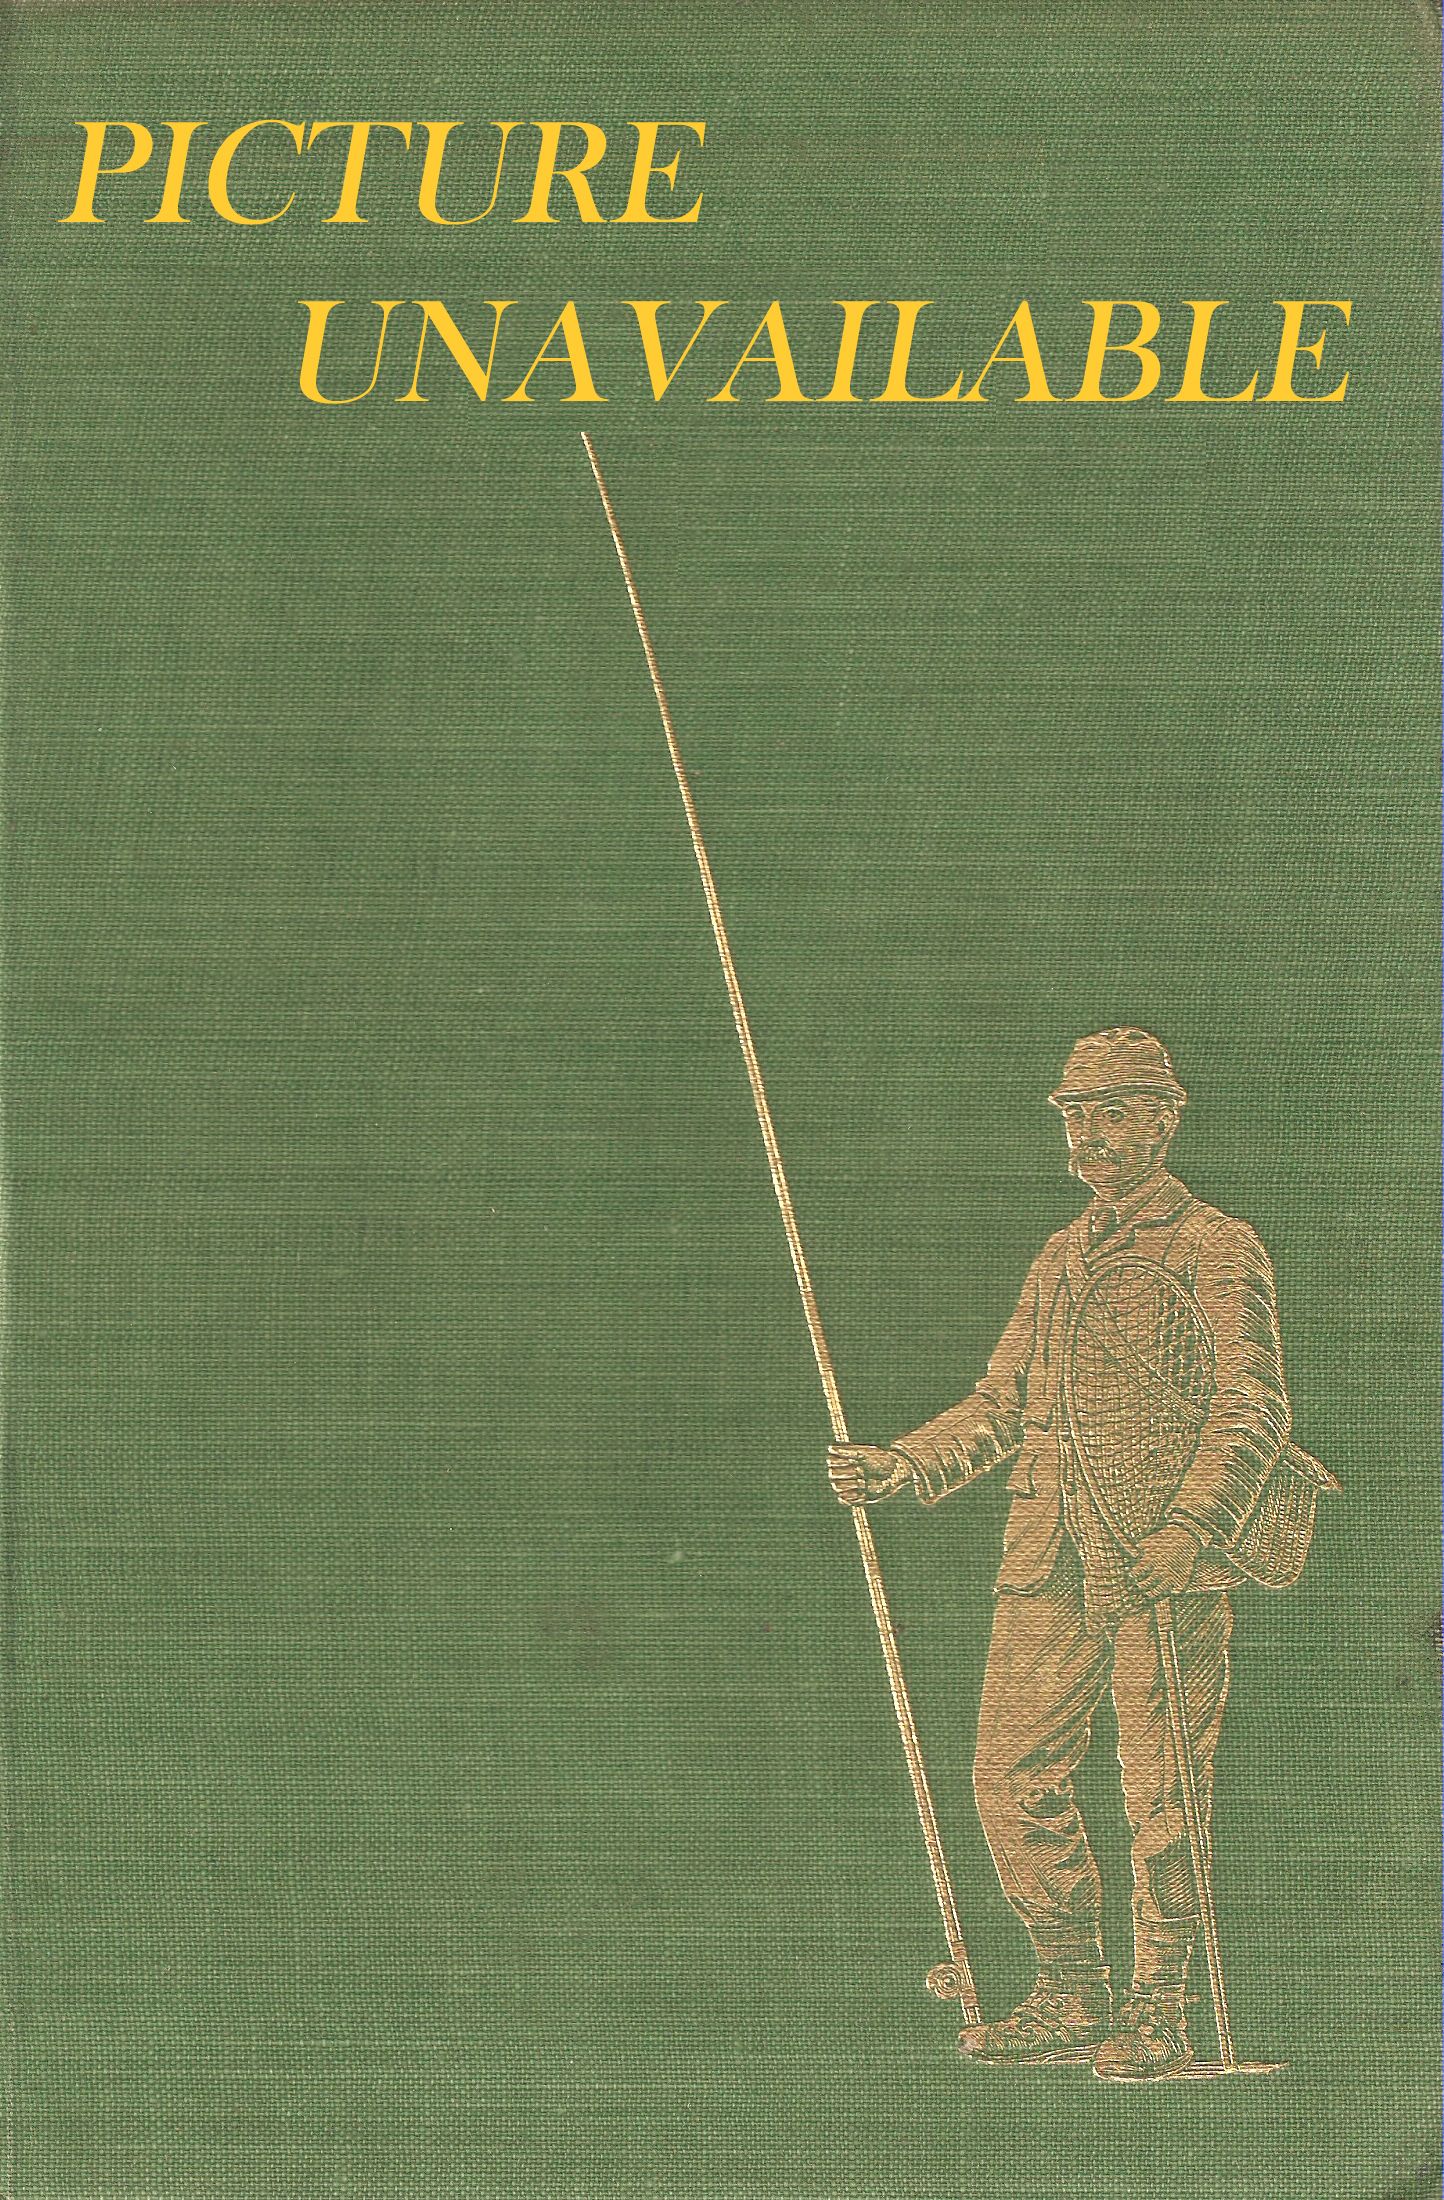 THE ANGLING TIMES BOOK OF COARSE FISHING. By Allan Haines and Mac Campbell.